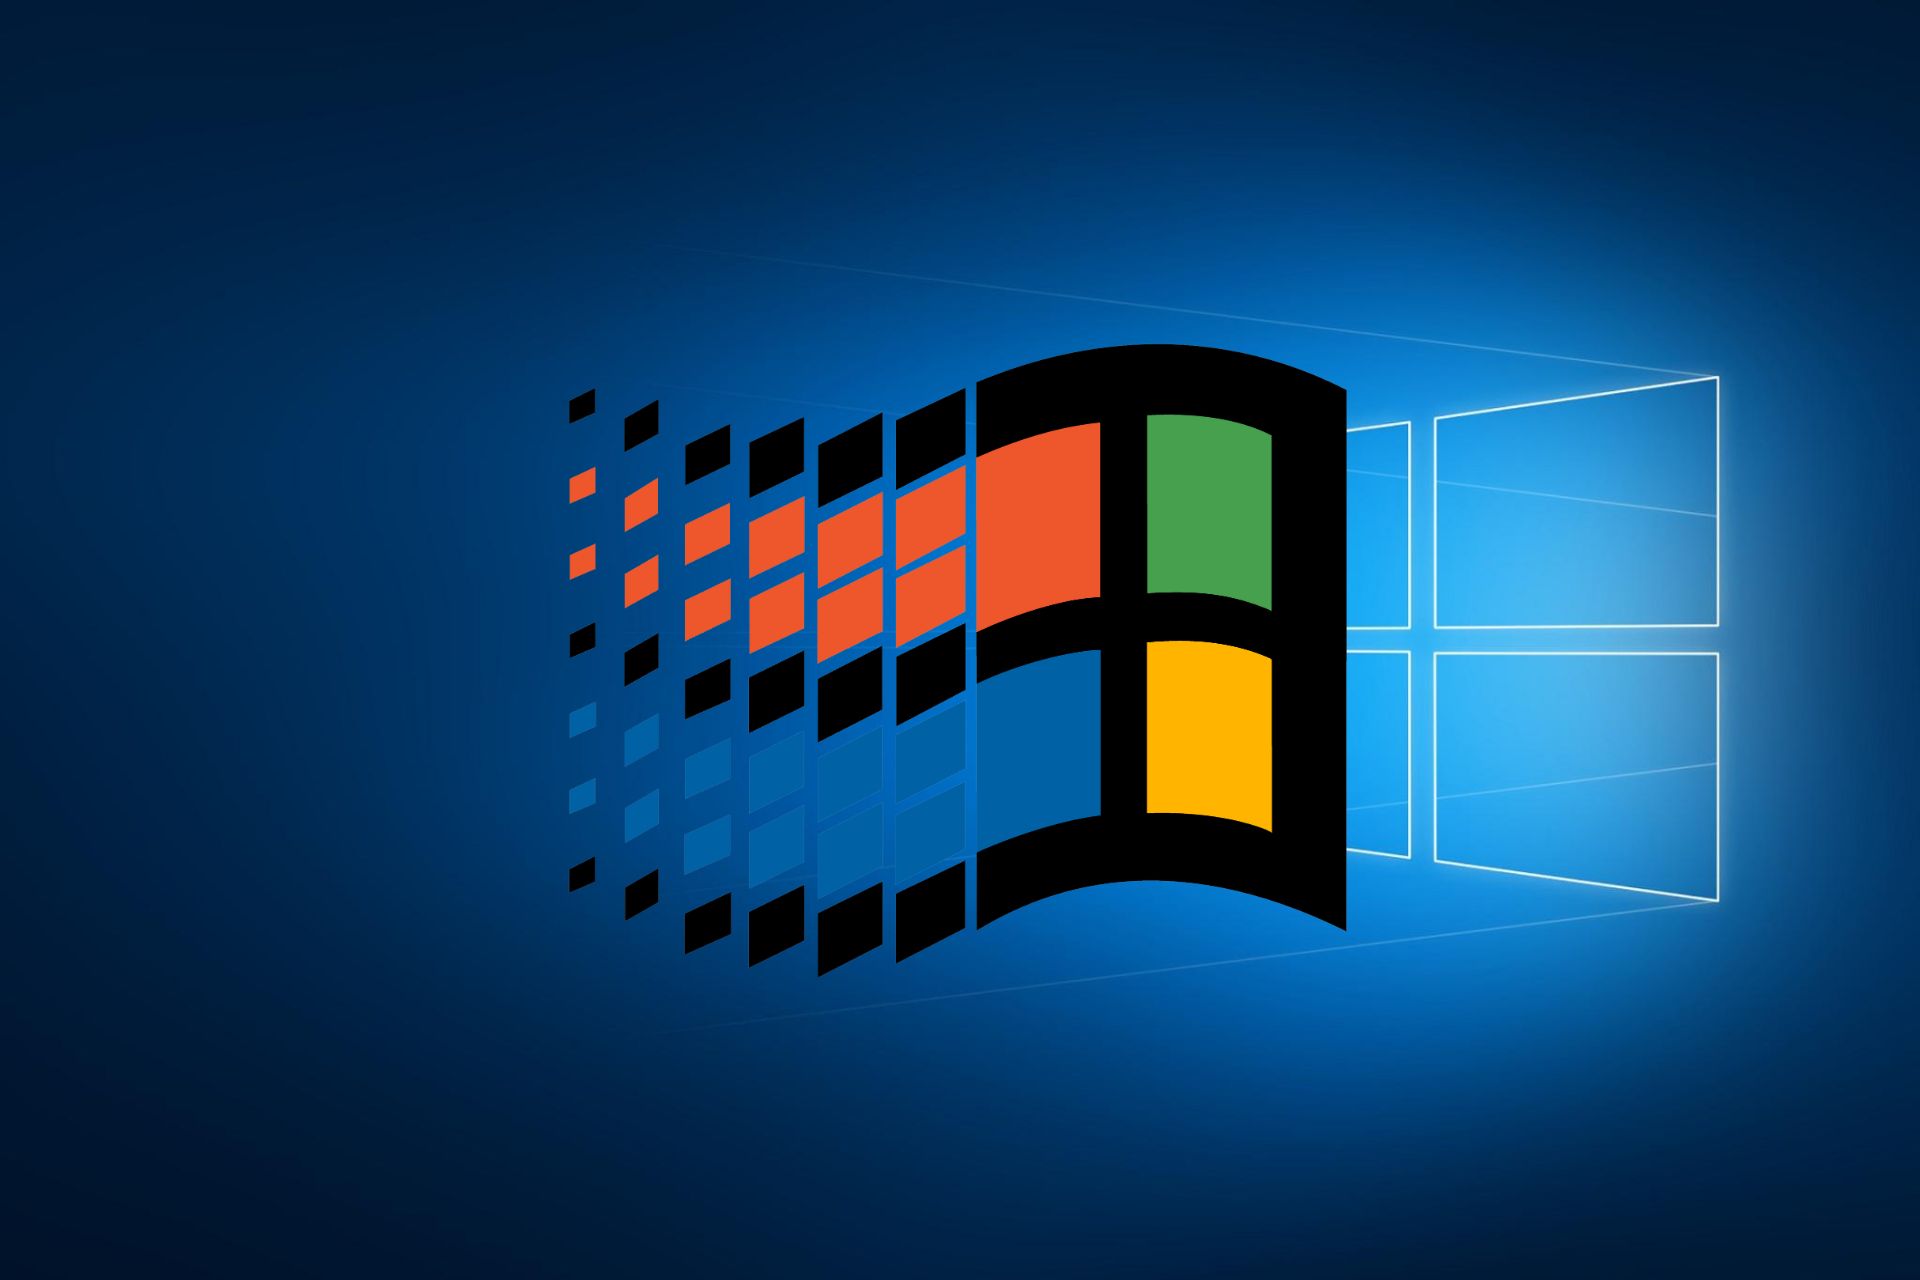 How to install Windows 95 theme on a Windows 10 PC